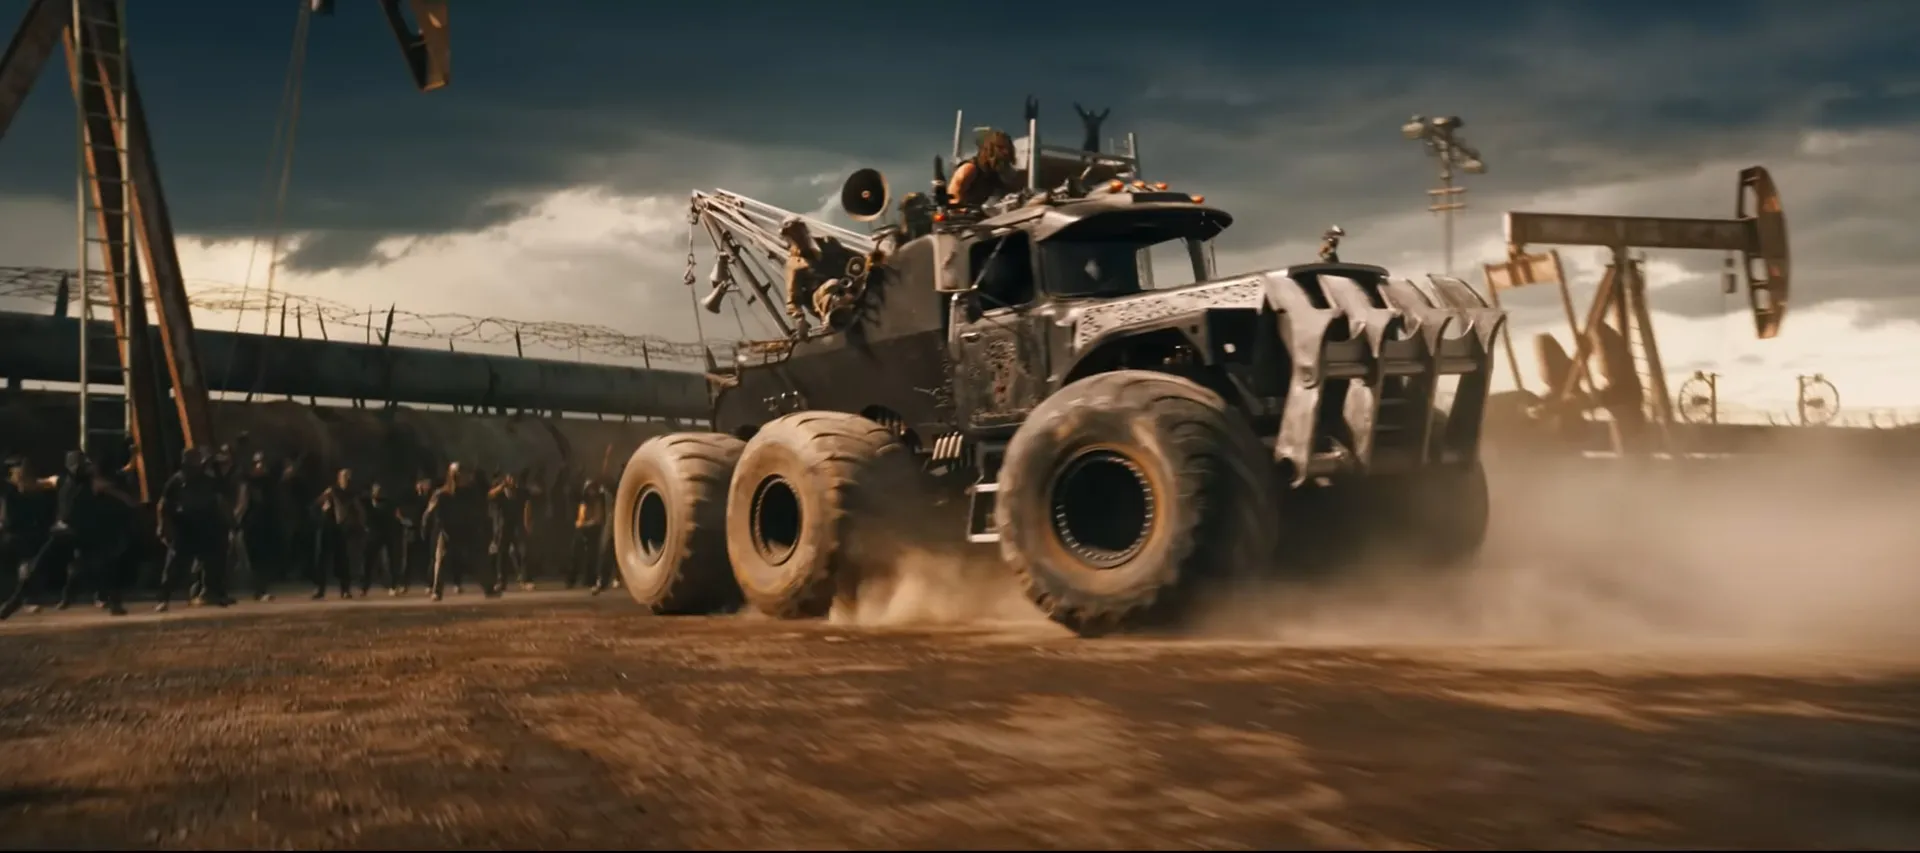 Watch the first trailer for “Furiosa: A Mad Max Saga” Auto Recent